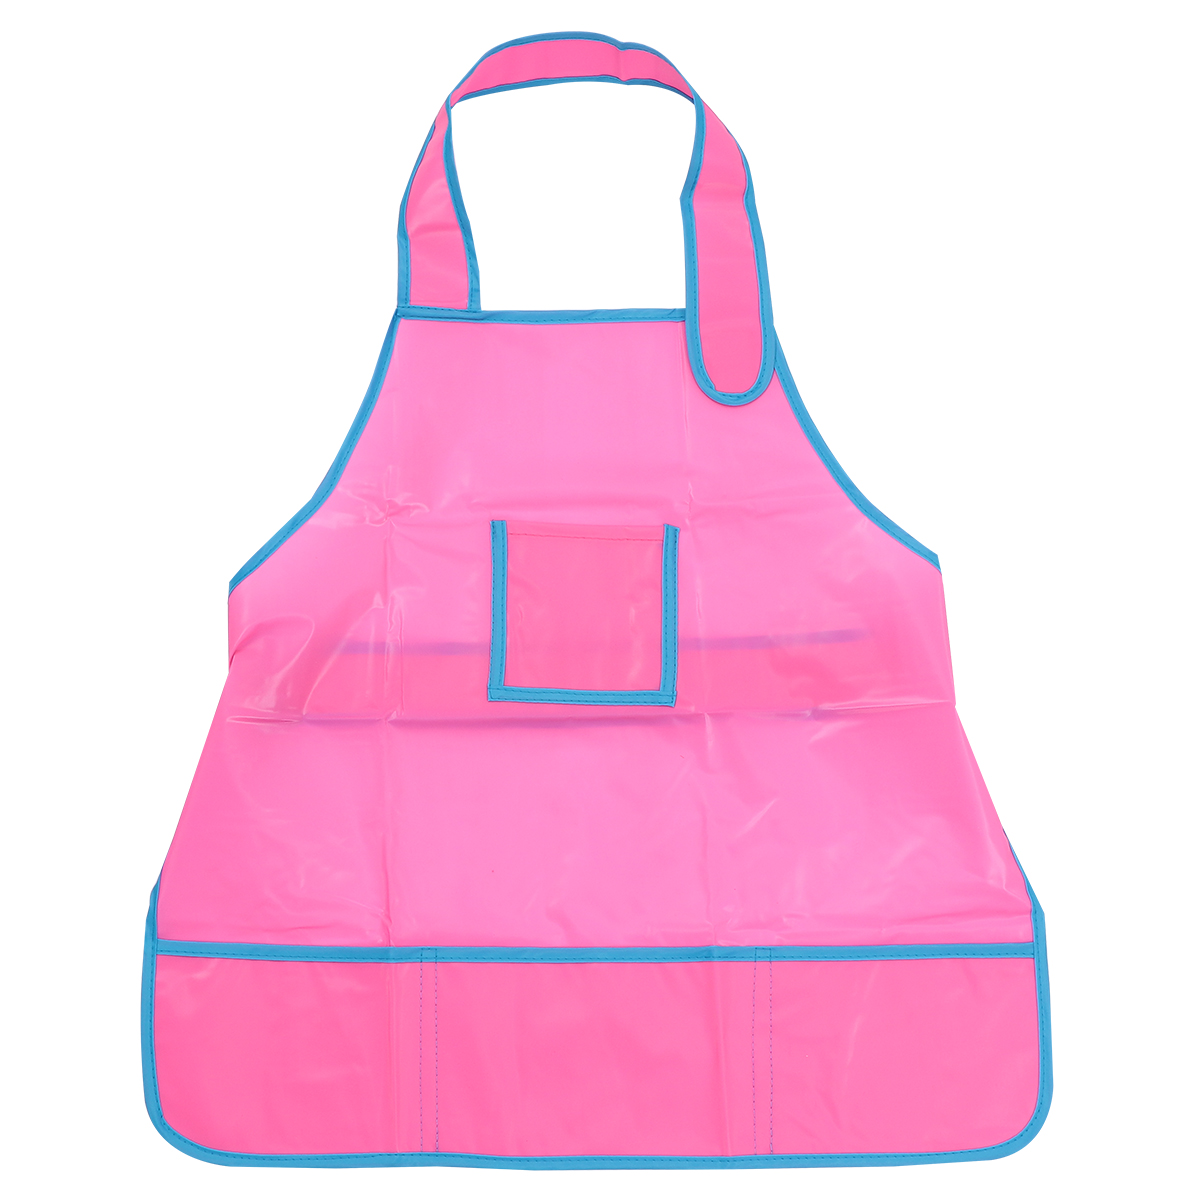 OUNONA 1pc Kids Painting Aprons Useful Durable Pink Arts Aprons Art Craft  Apron Smock Drawing Painting Smock for Children Pupils Kids 